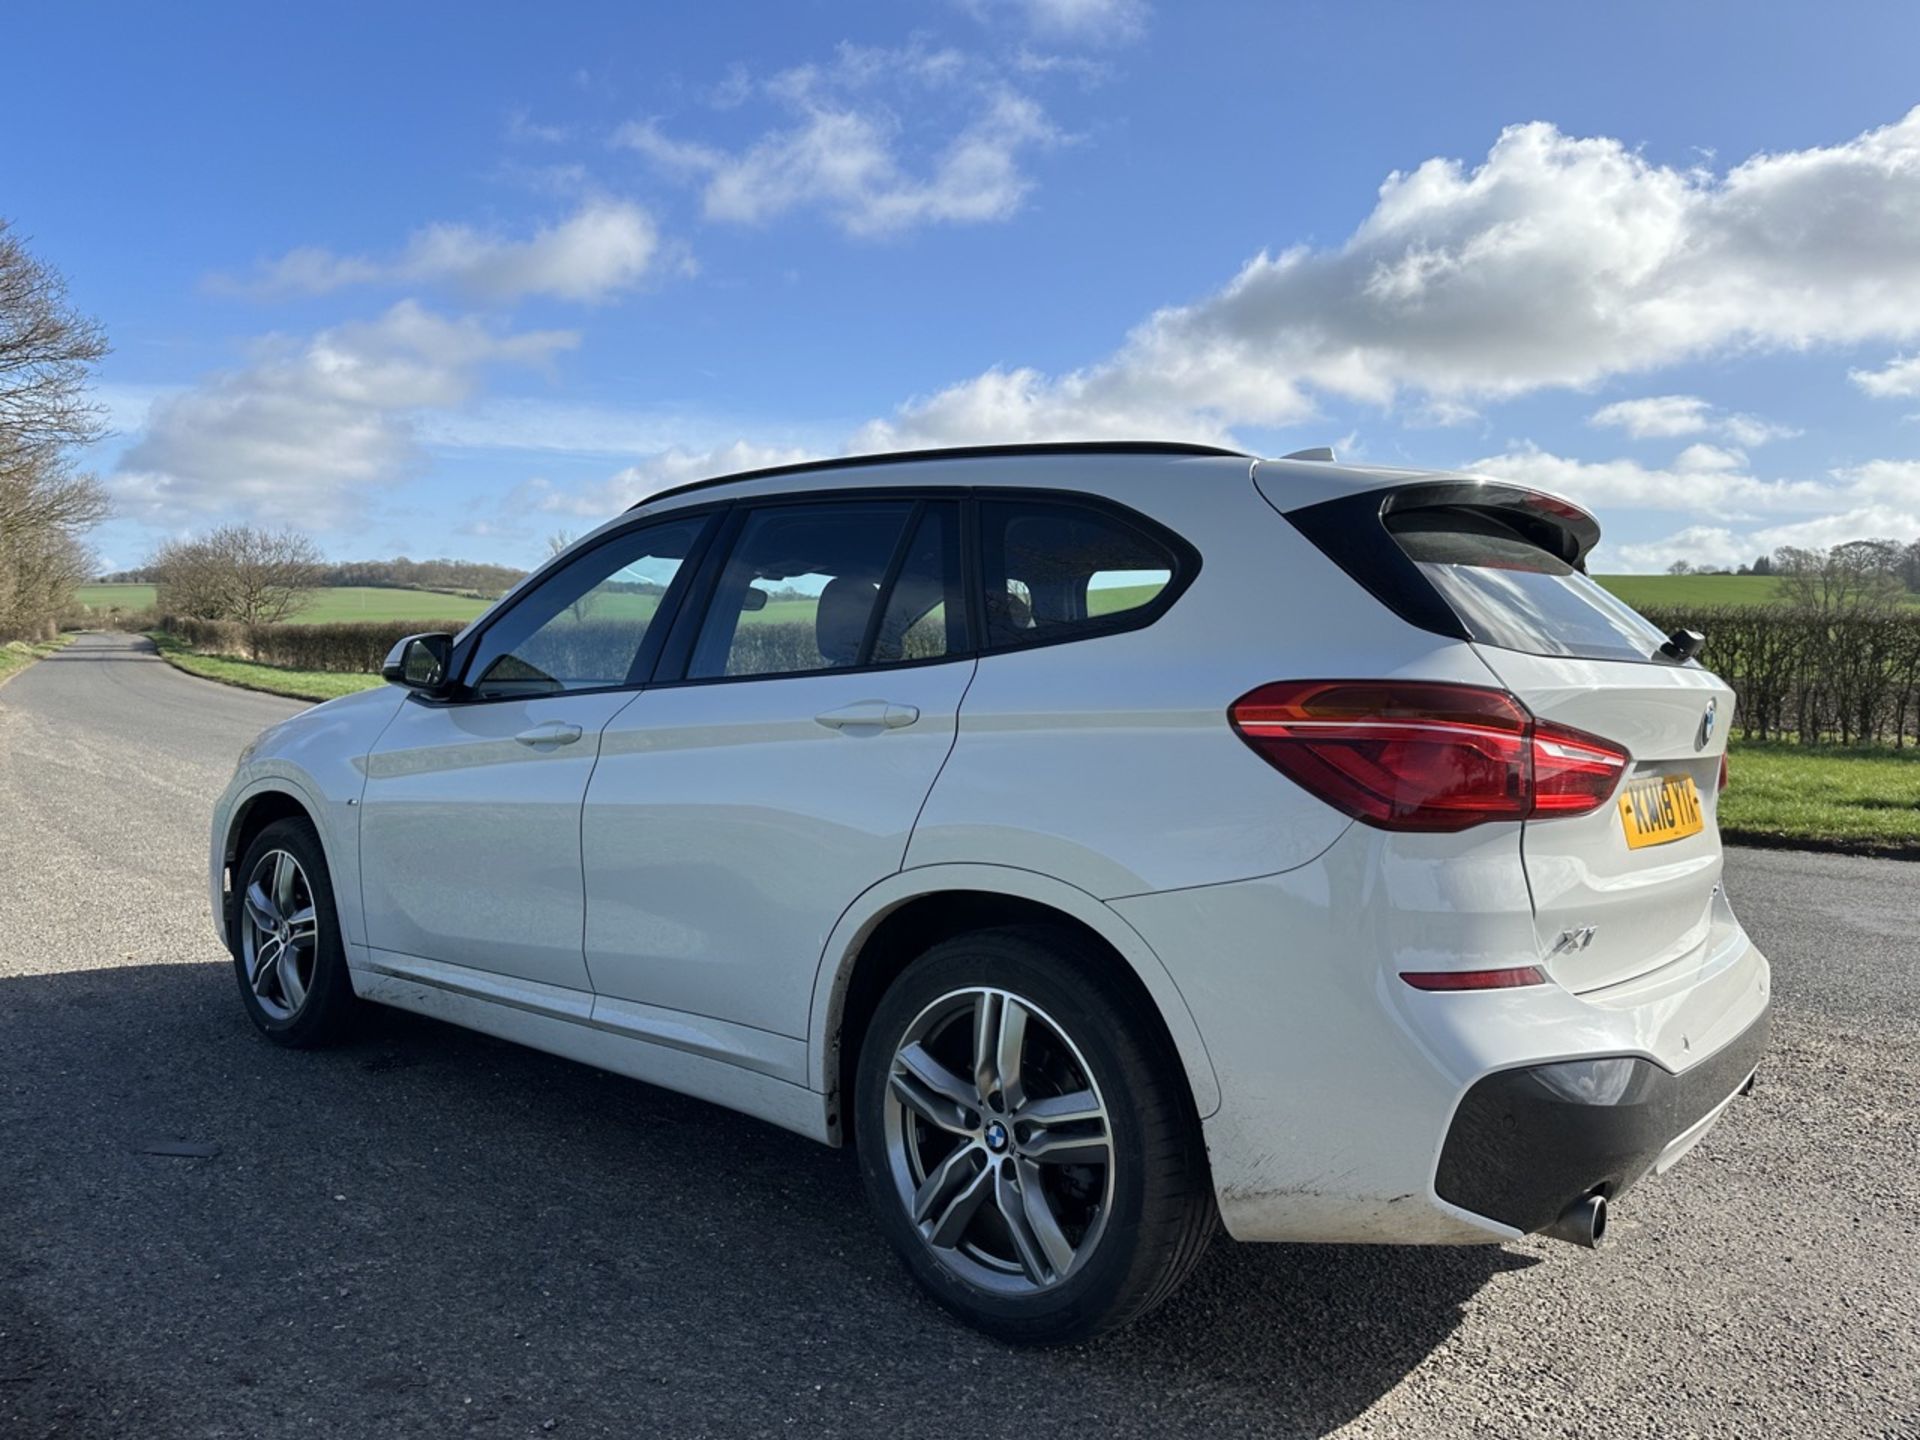 BMW X1 Xdrive20i M Sport Auto 20i - 2018 - 16.5k MILES ONLY - M SPORT Seats/badging - Image 7 of 38